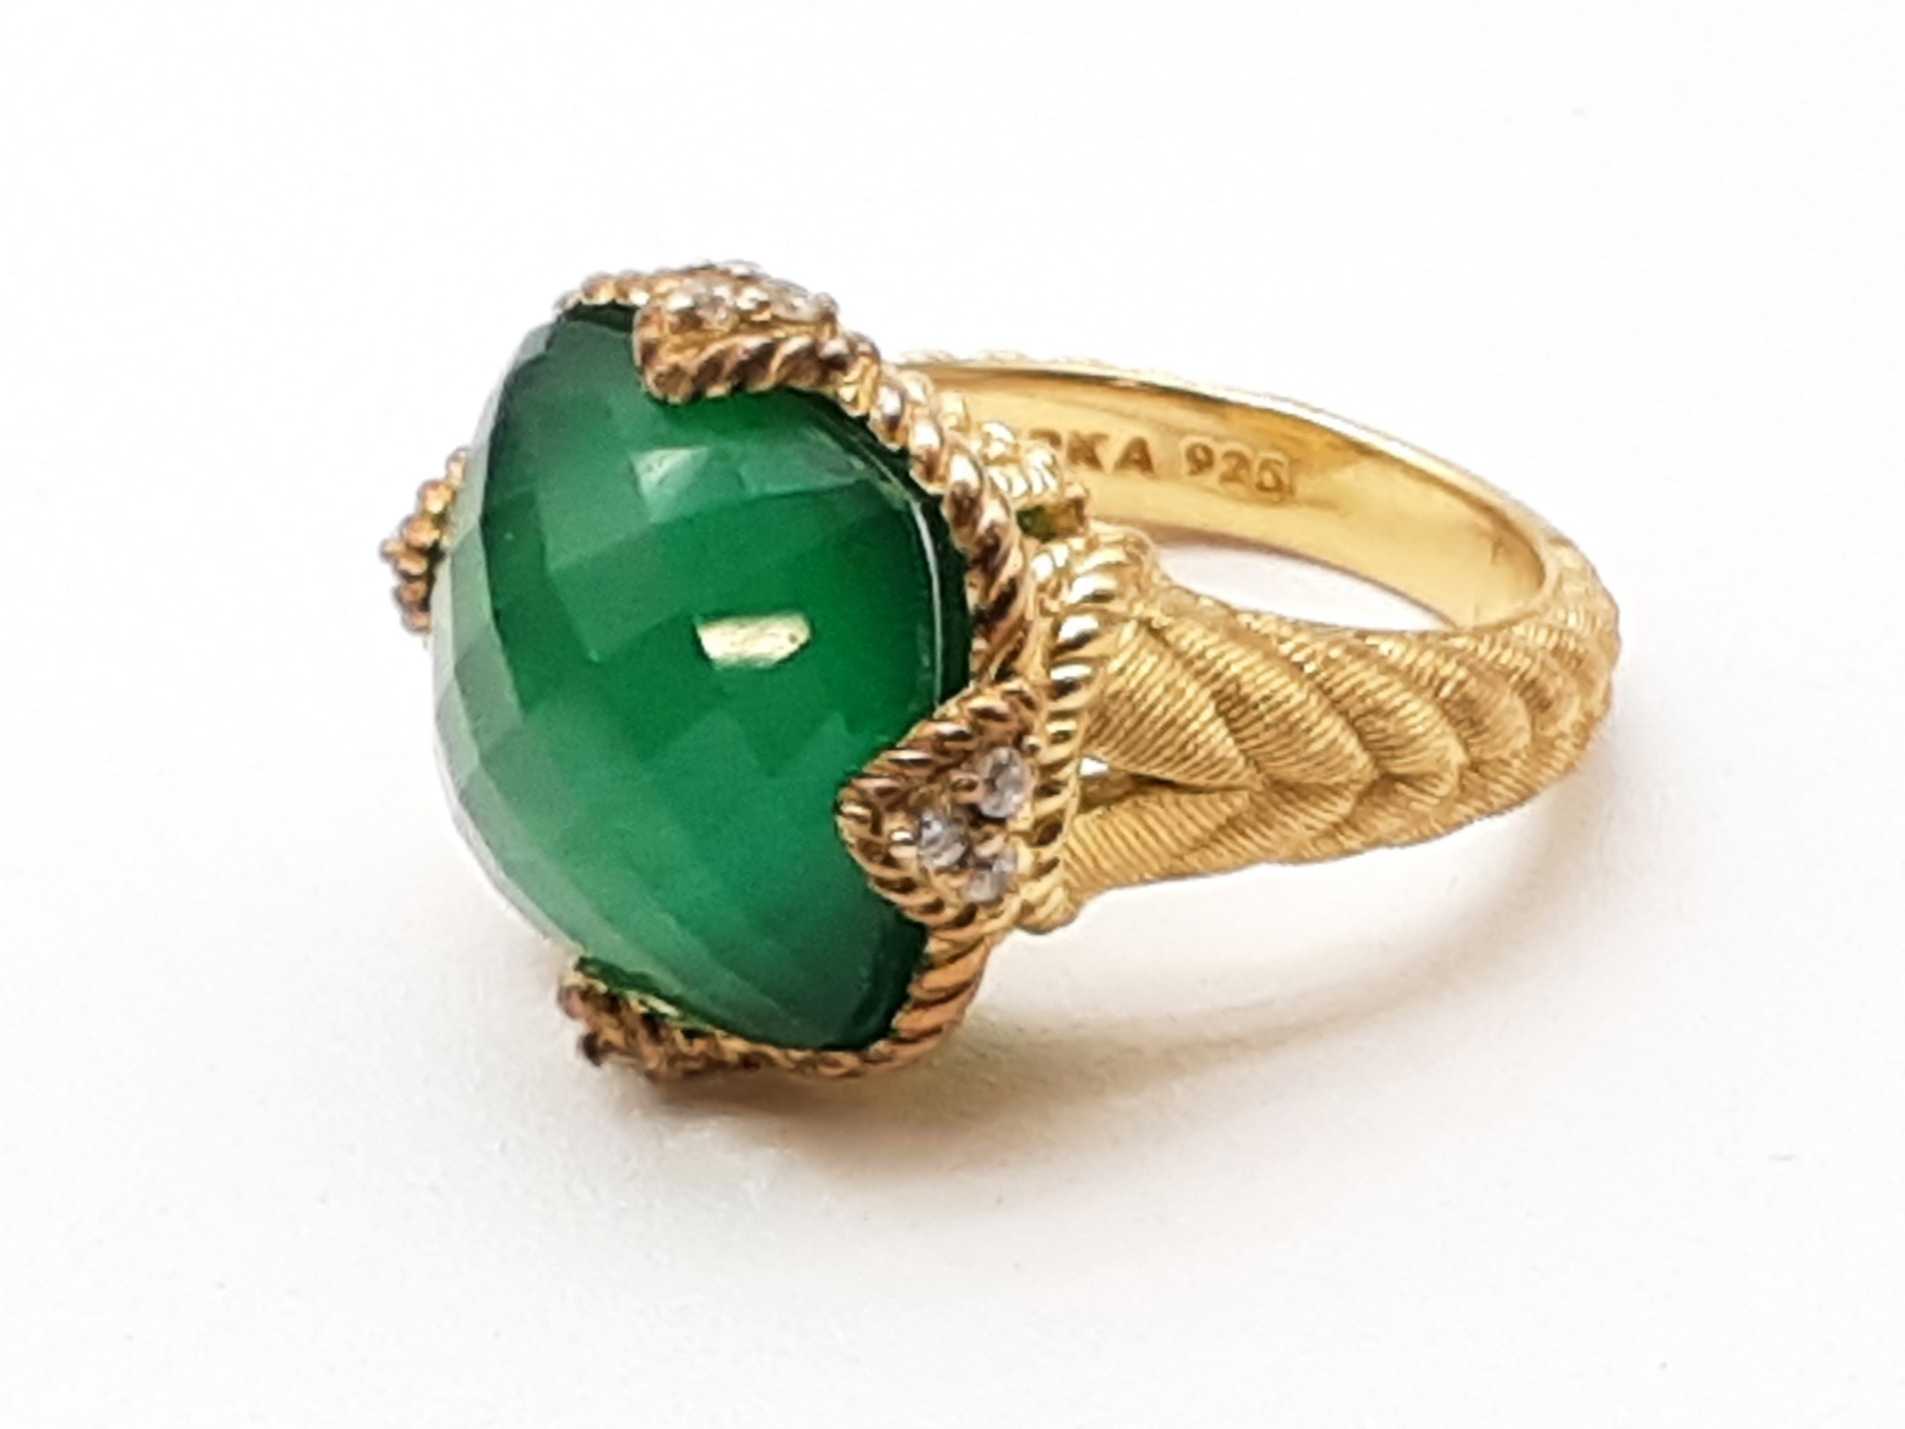 Judith Rippka Gold Plated Silver Green Goddess Ring Size 7 Dolrxde 144020012559